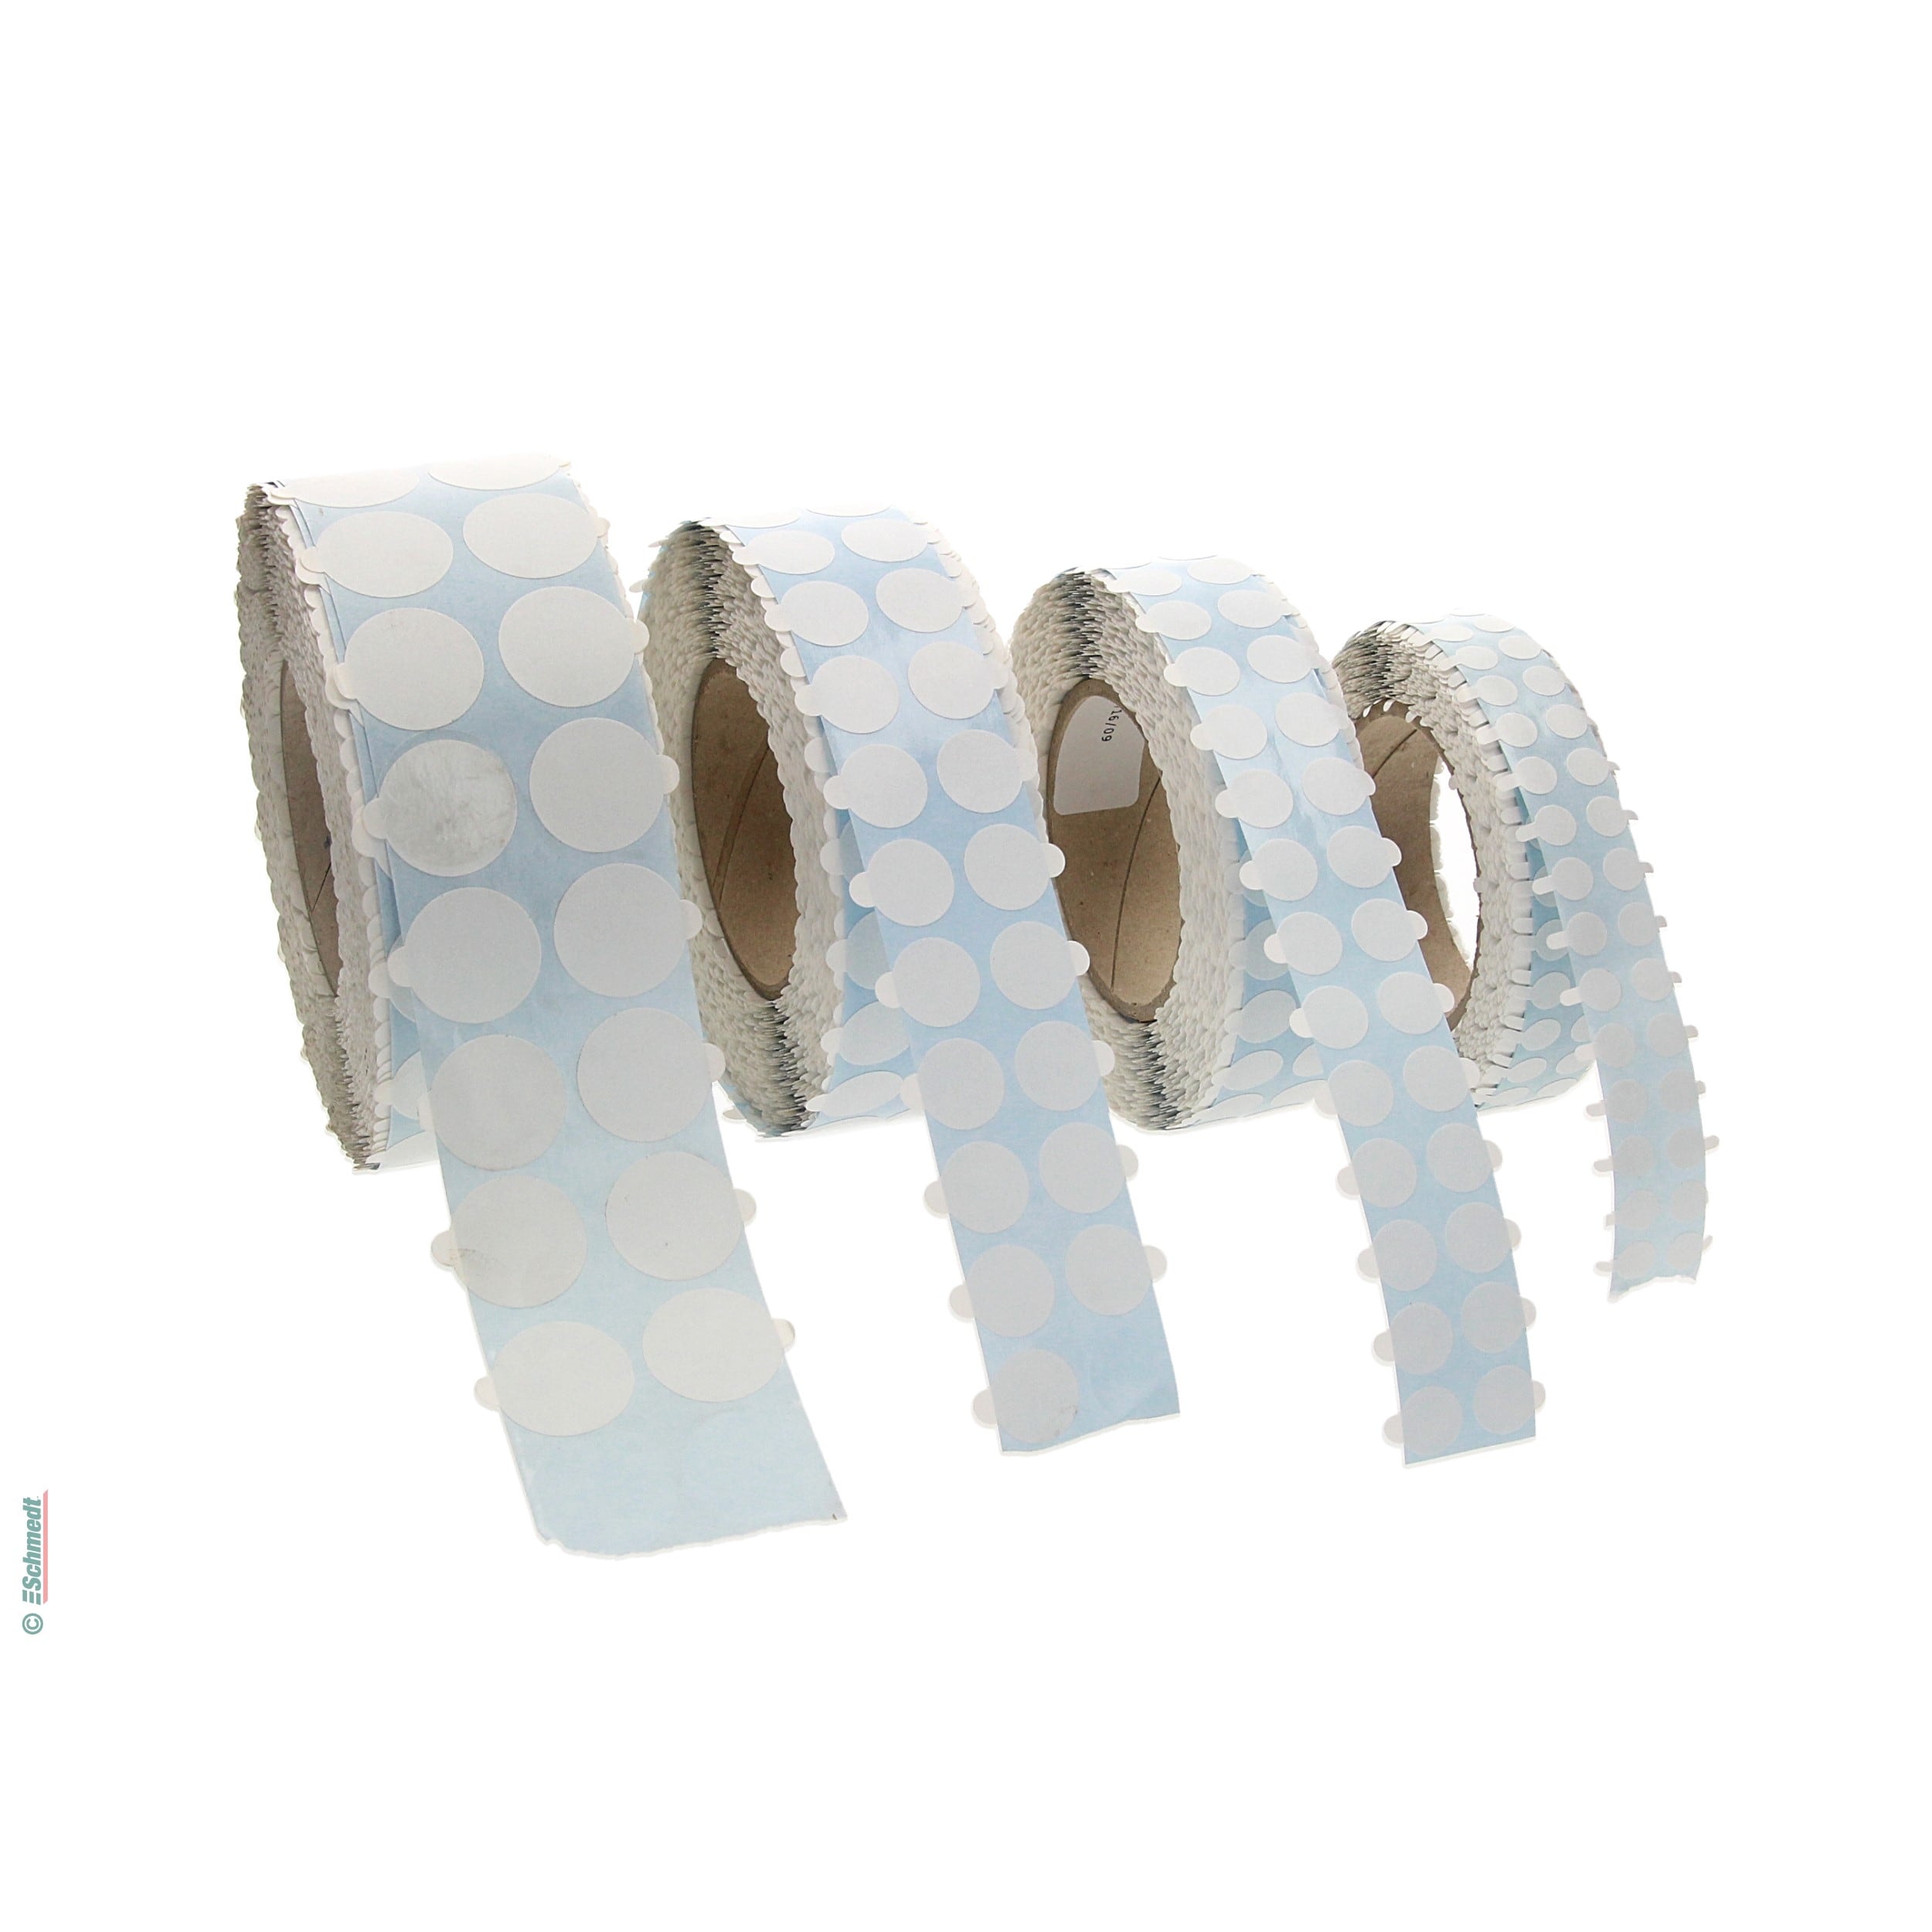 CLEAR PACKING BEST REVIEWSEach roll is "double"! 36 ROLLS SHIPPING TAPE 